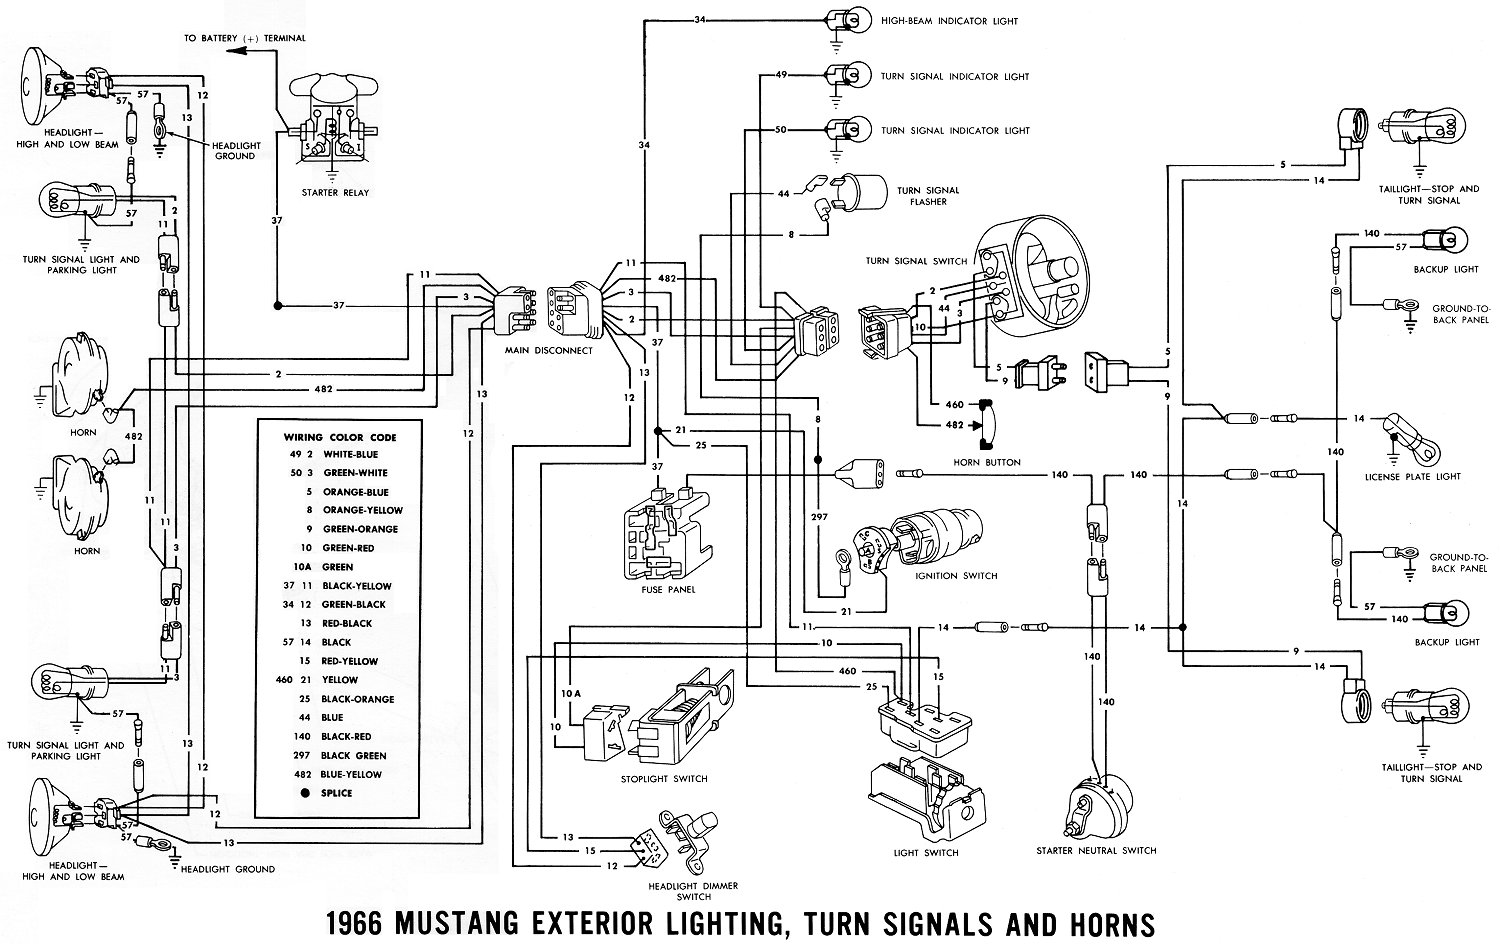 1969 Mustang Dash Wiring Diagram from midlife66.com